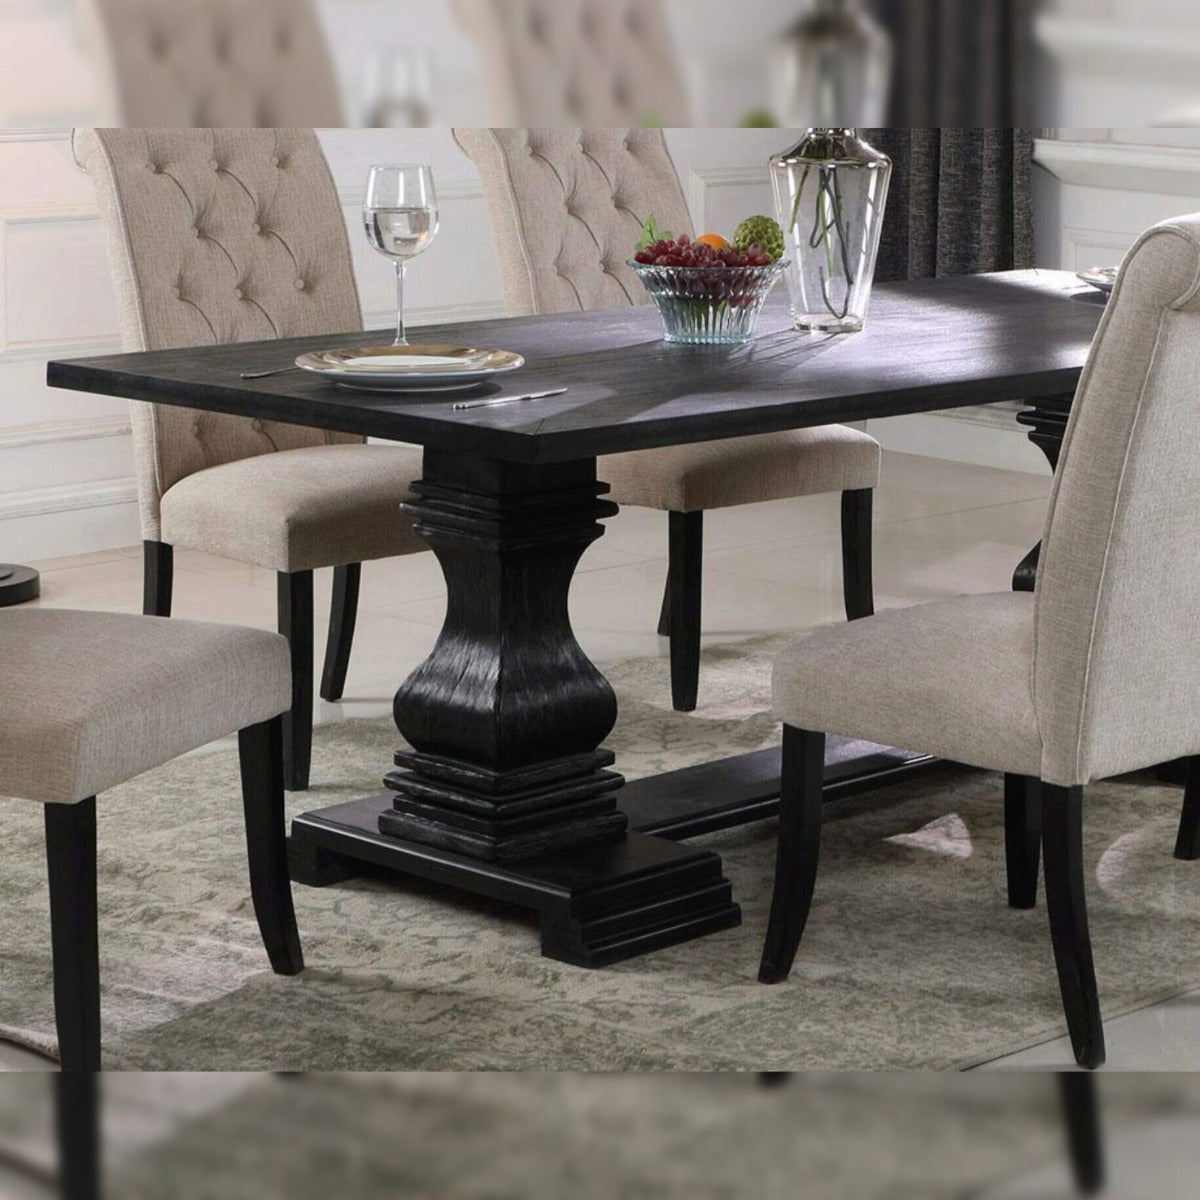 McFerran D7700 Chelsea Dining Collection - Solid Wood Table